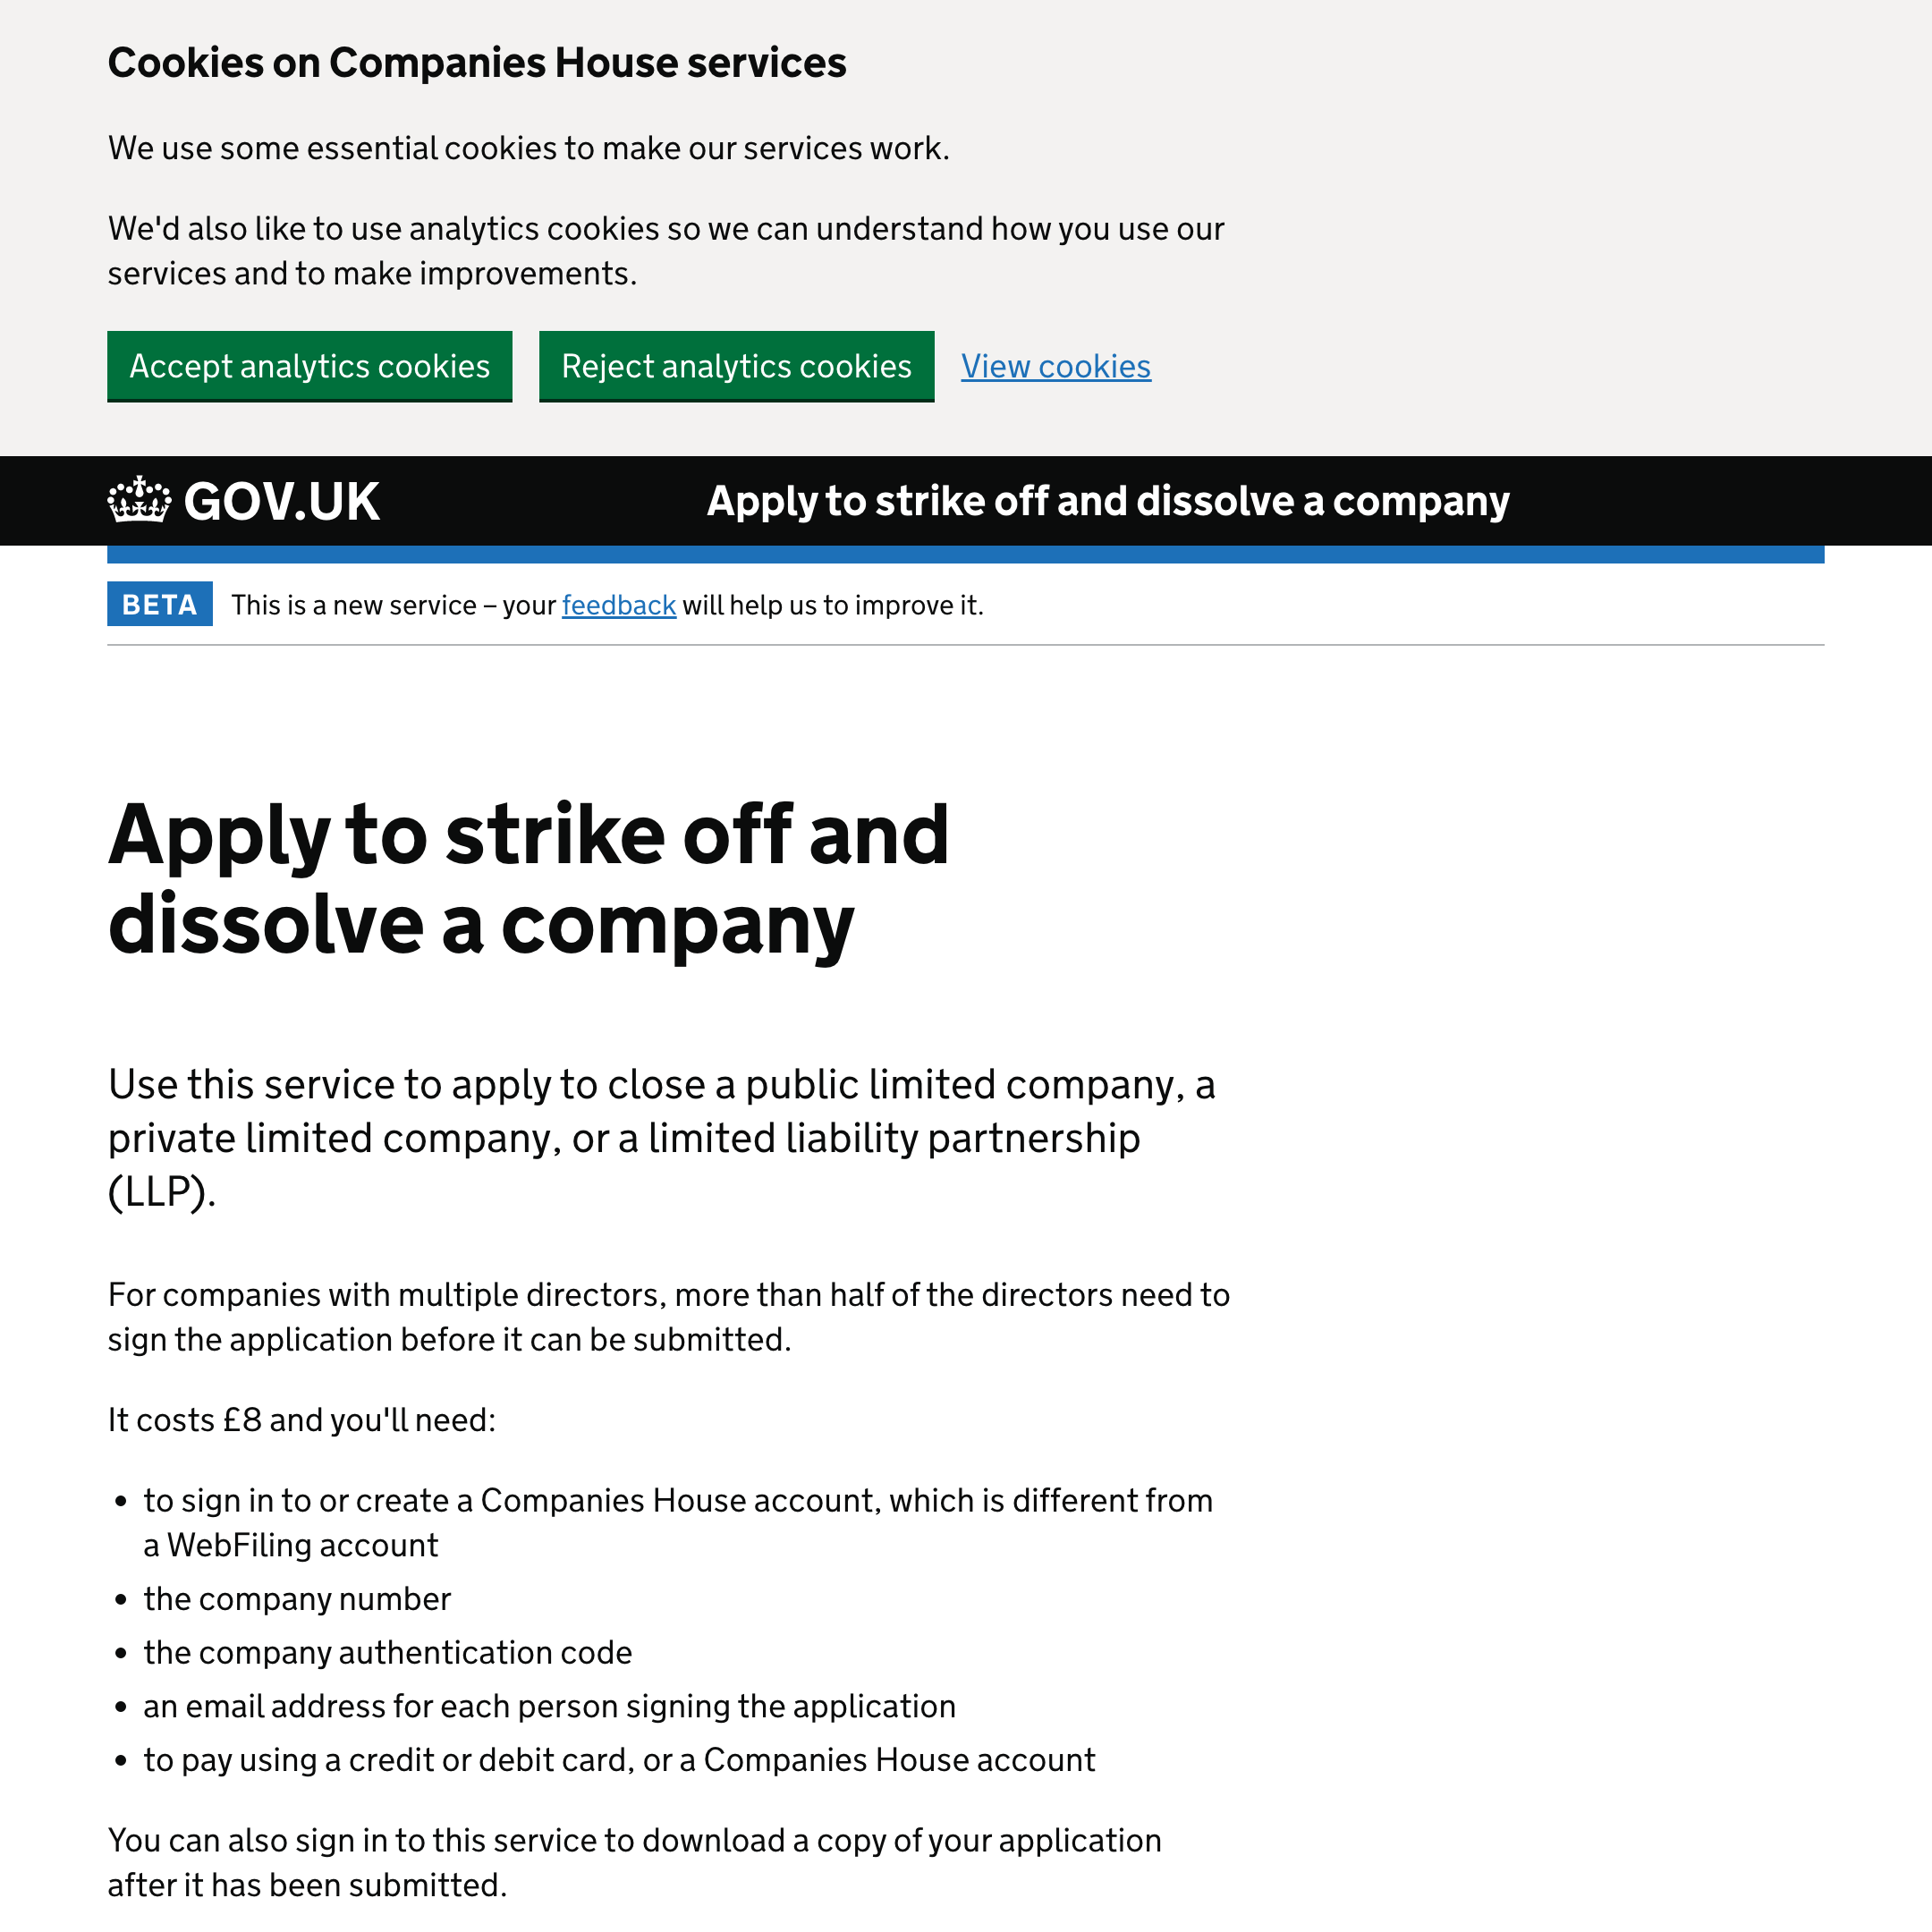 Apply to strike off and dissolve a company